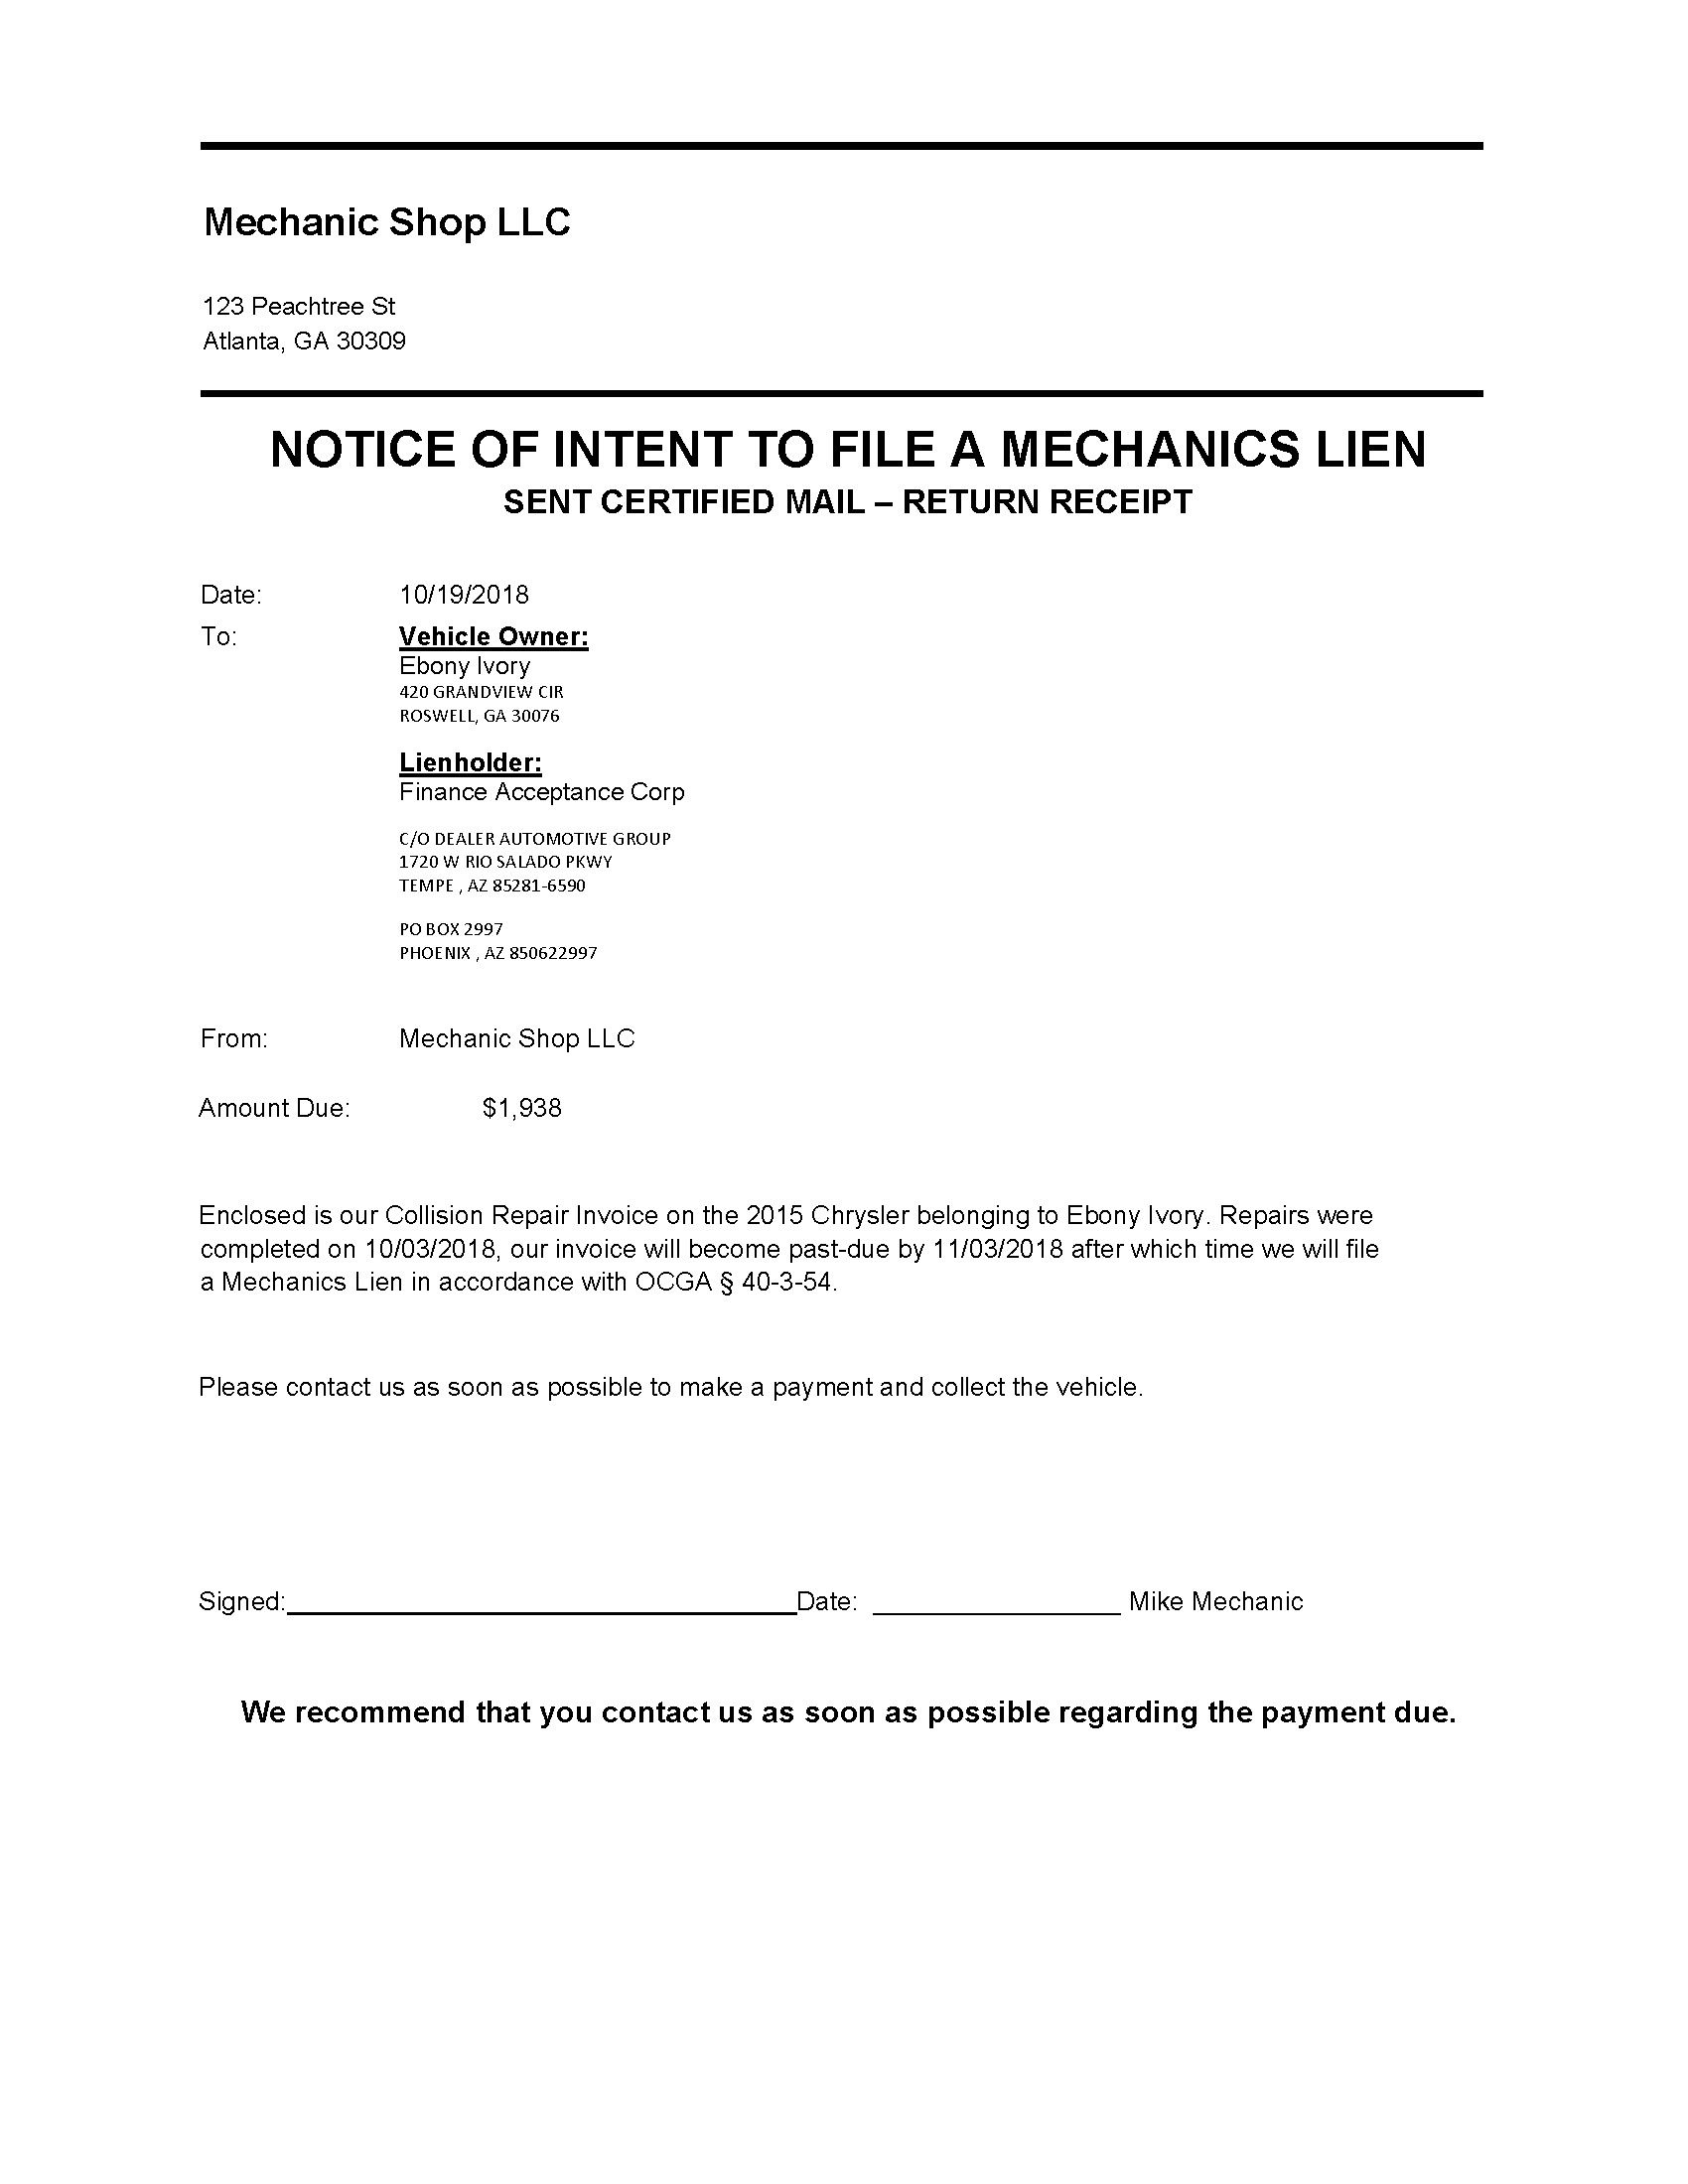 NOTICE OF INTENT TO FILE A MECHANICS LIEN Diminished Value Georgia